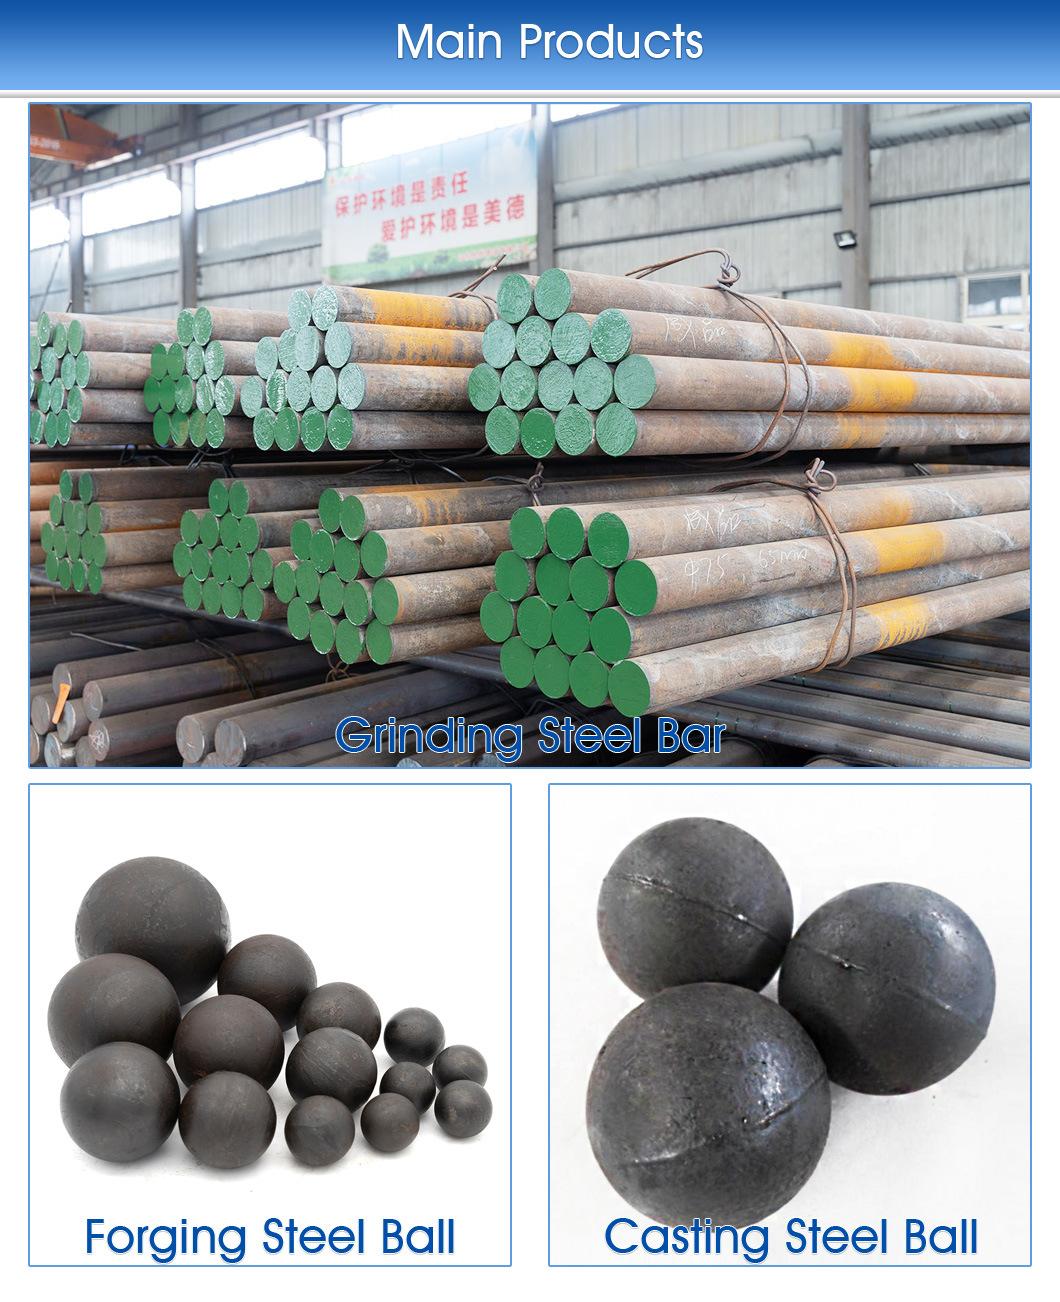 High Chrome Forged Steel Grinding Ball for Low Abrasion